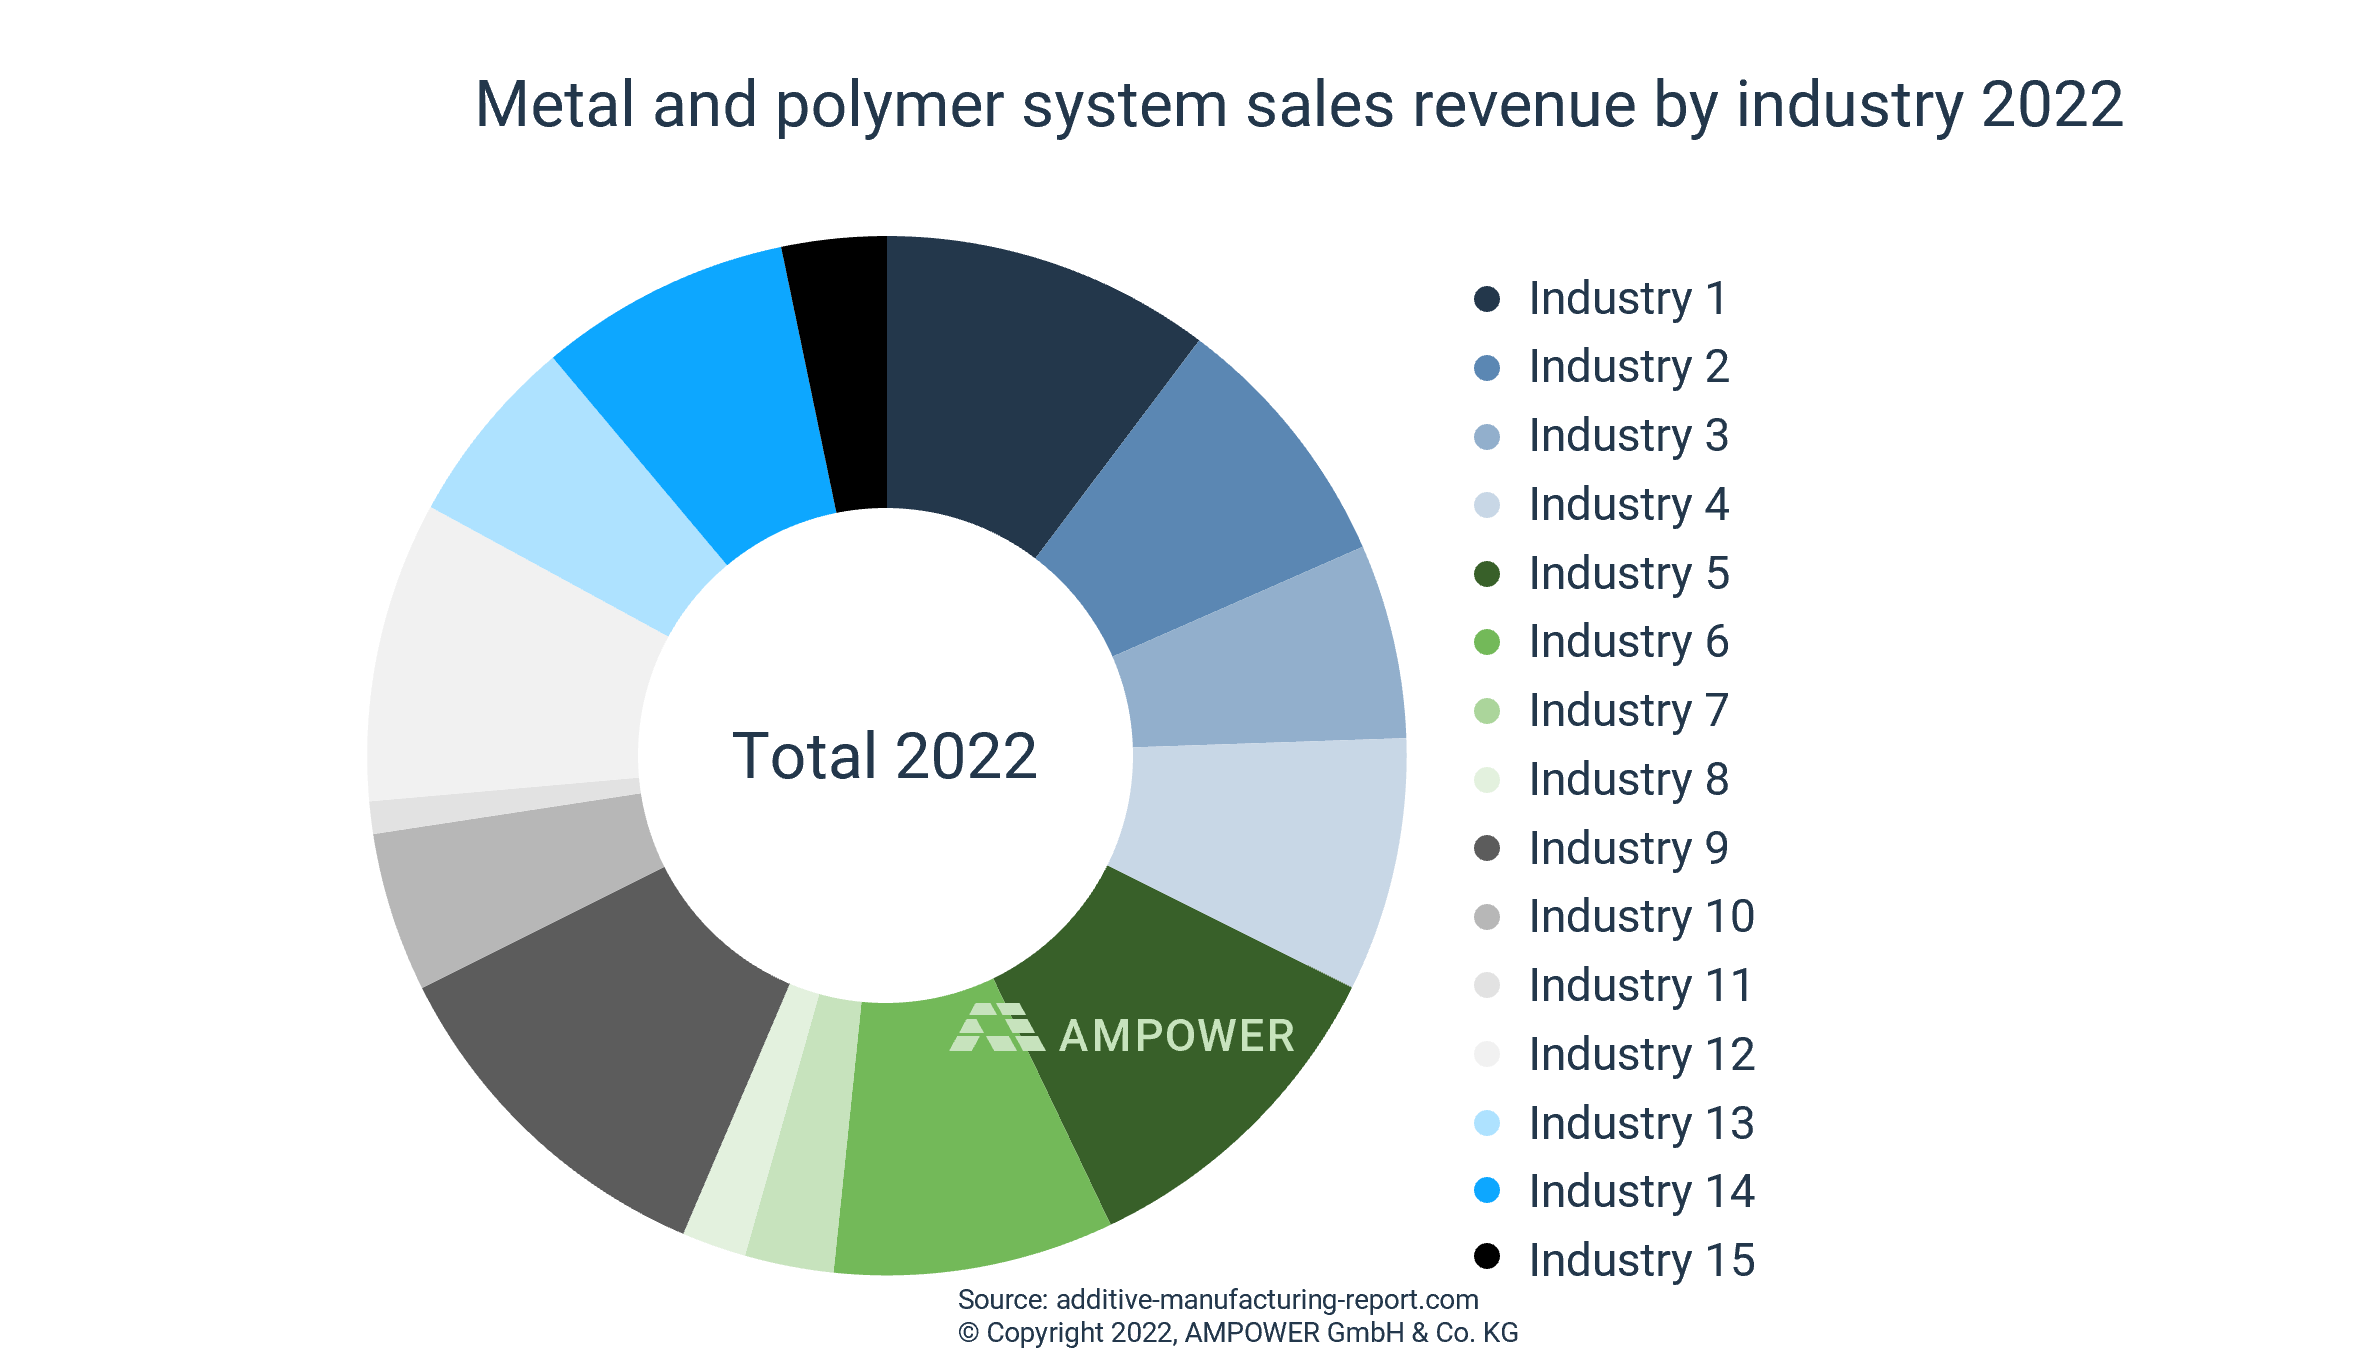 Metal and polymer system sales revenue by industry 2022 [EUR billion] dummie